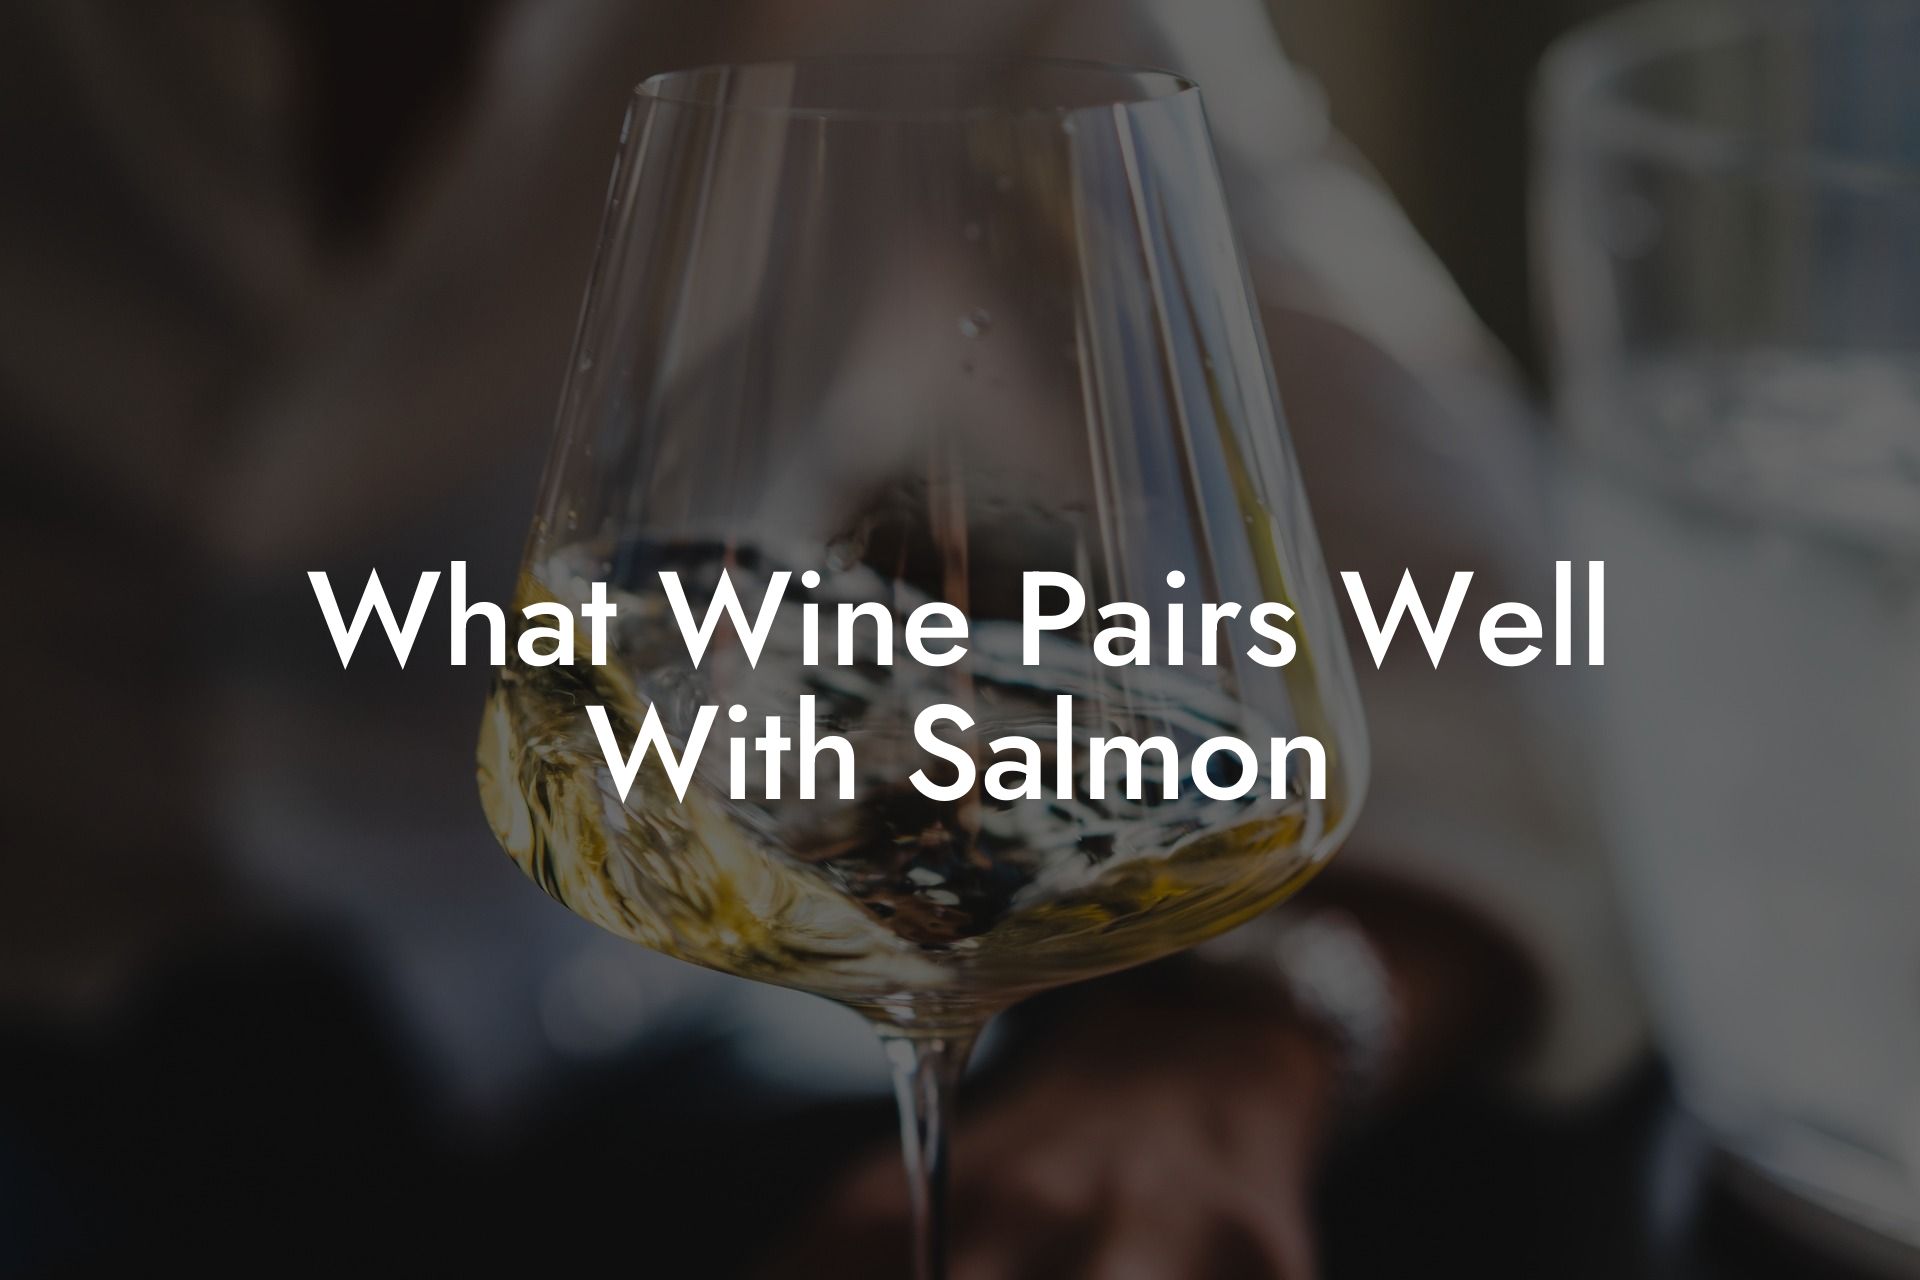 What Wine Pairs Well With Salmon